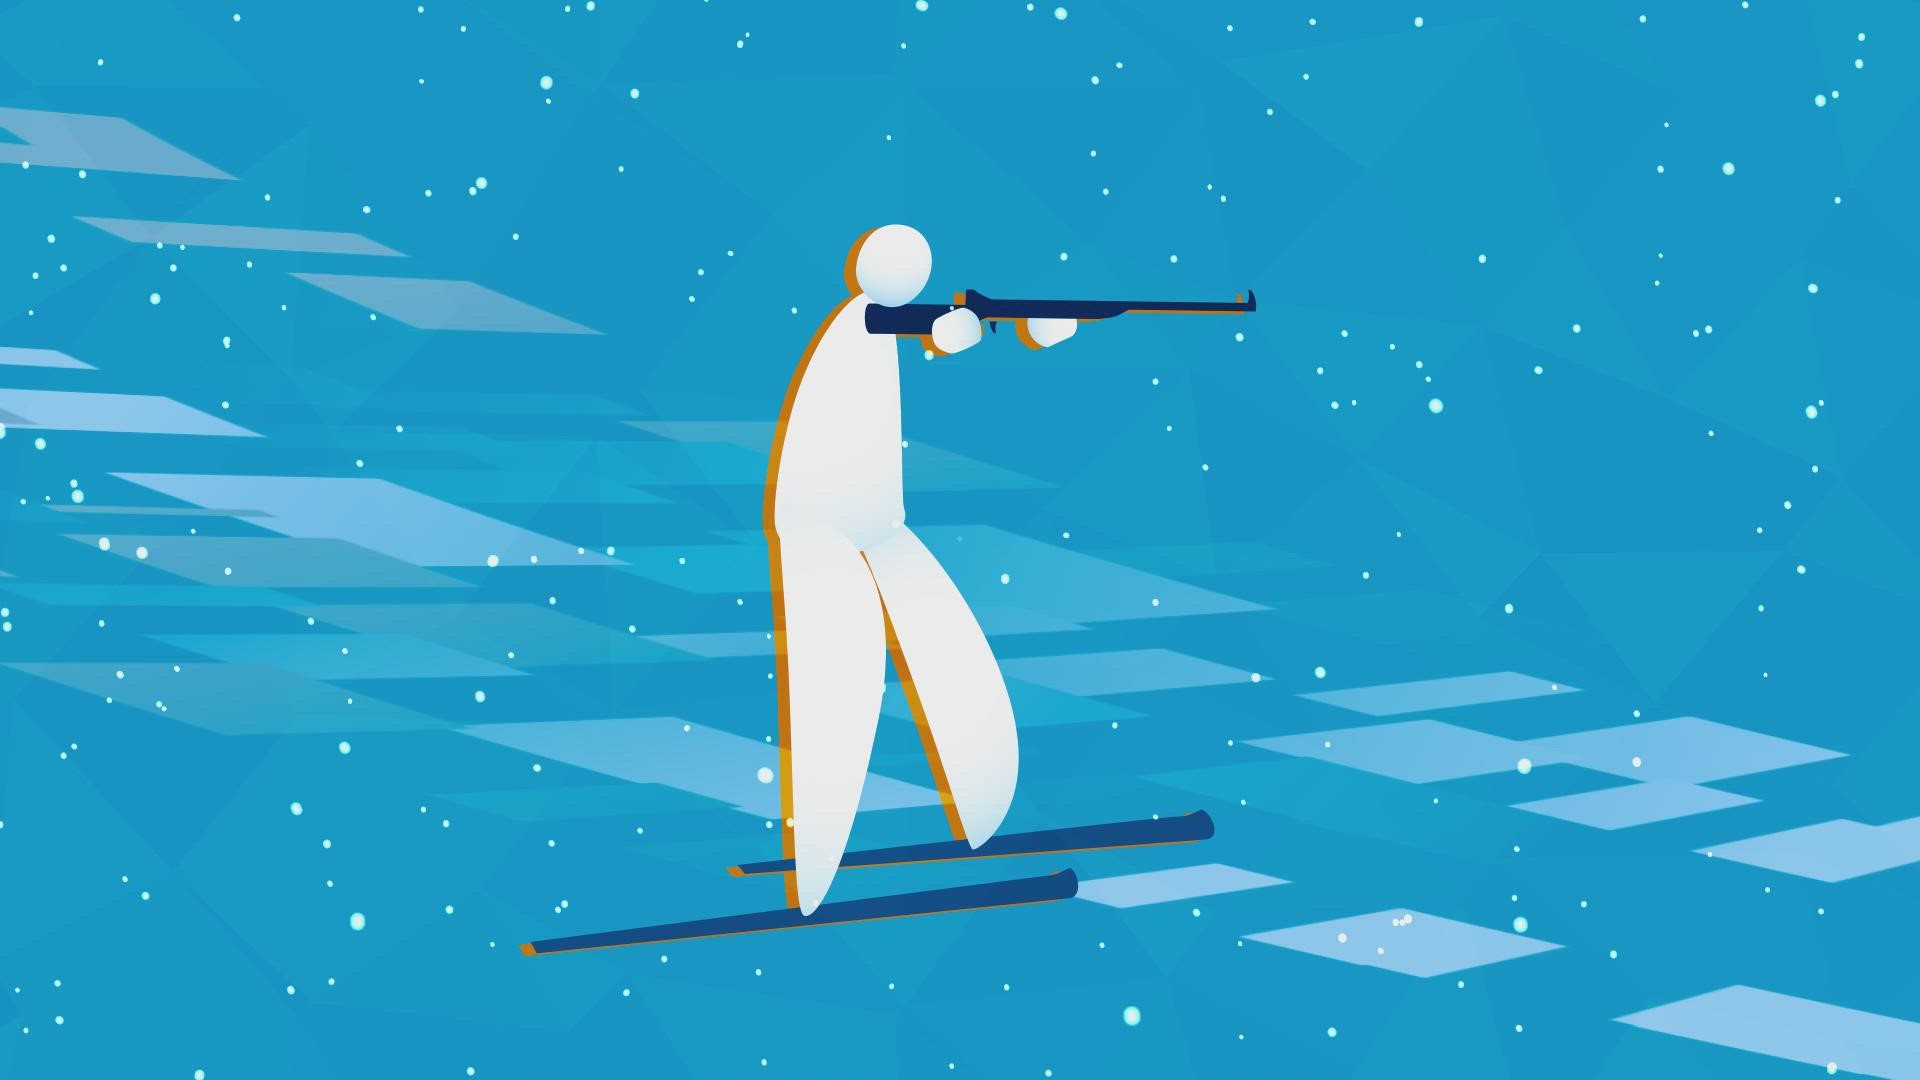 Biathlon combines cross-country skiing and rifle shooting. Here are the rules.